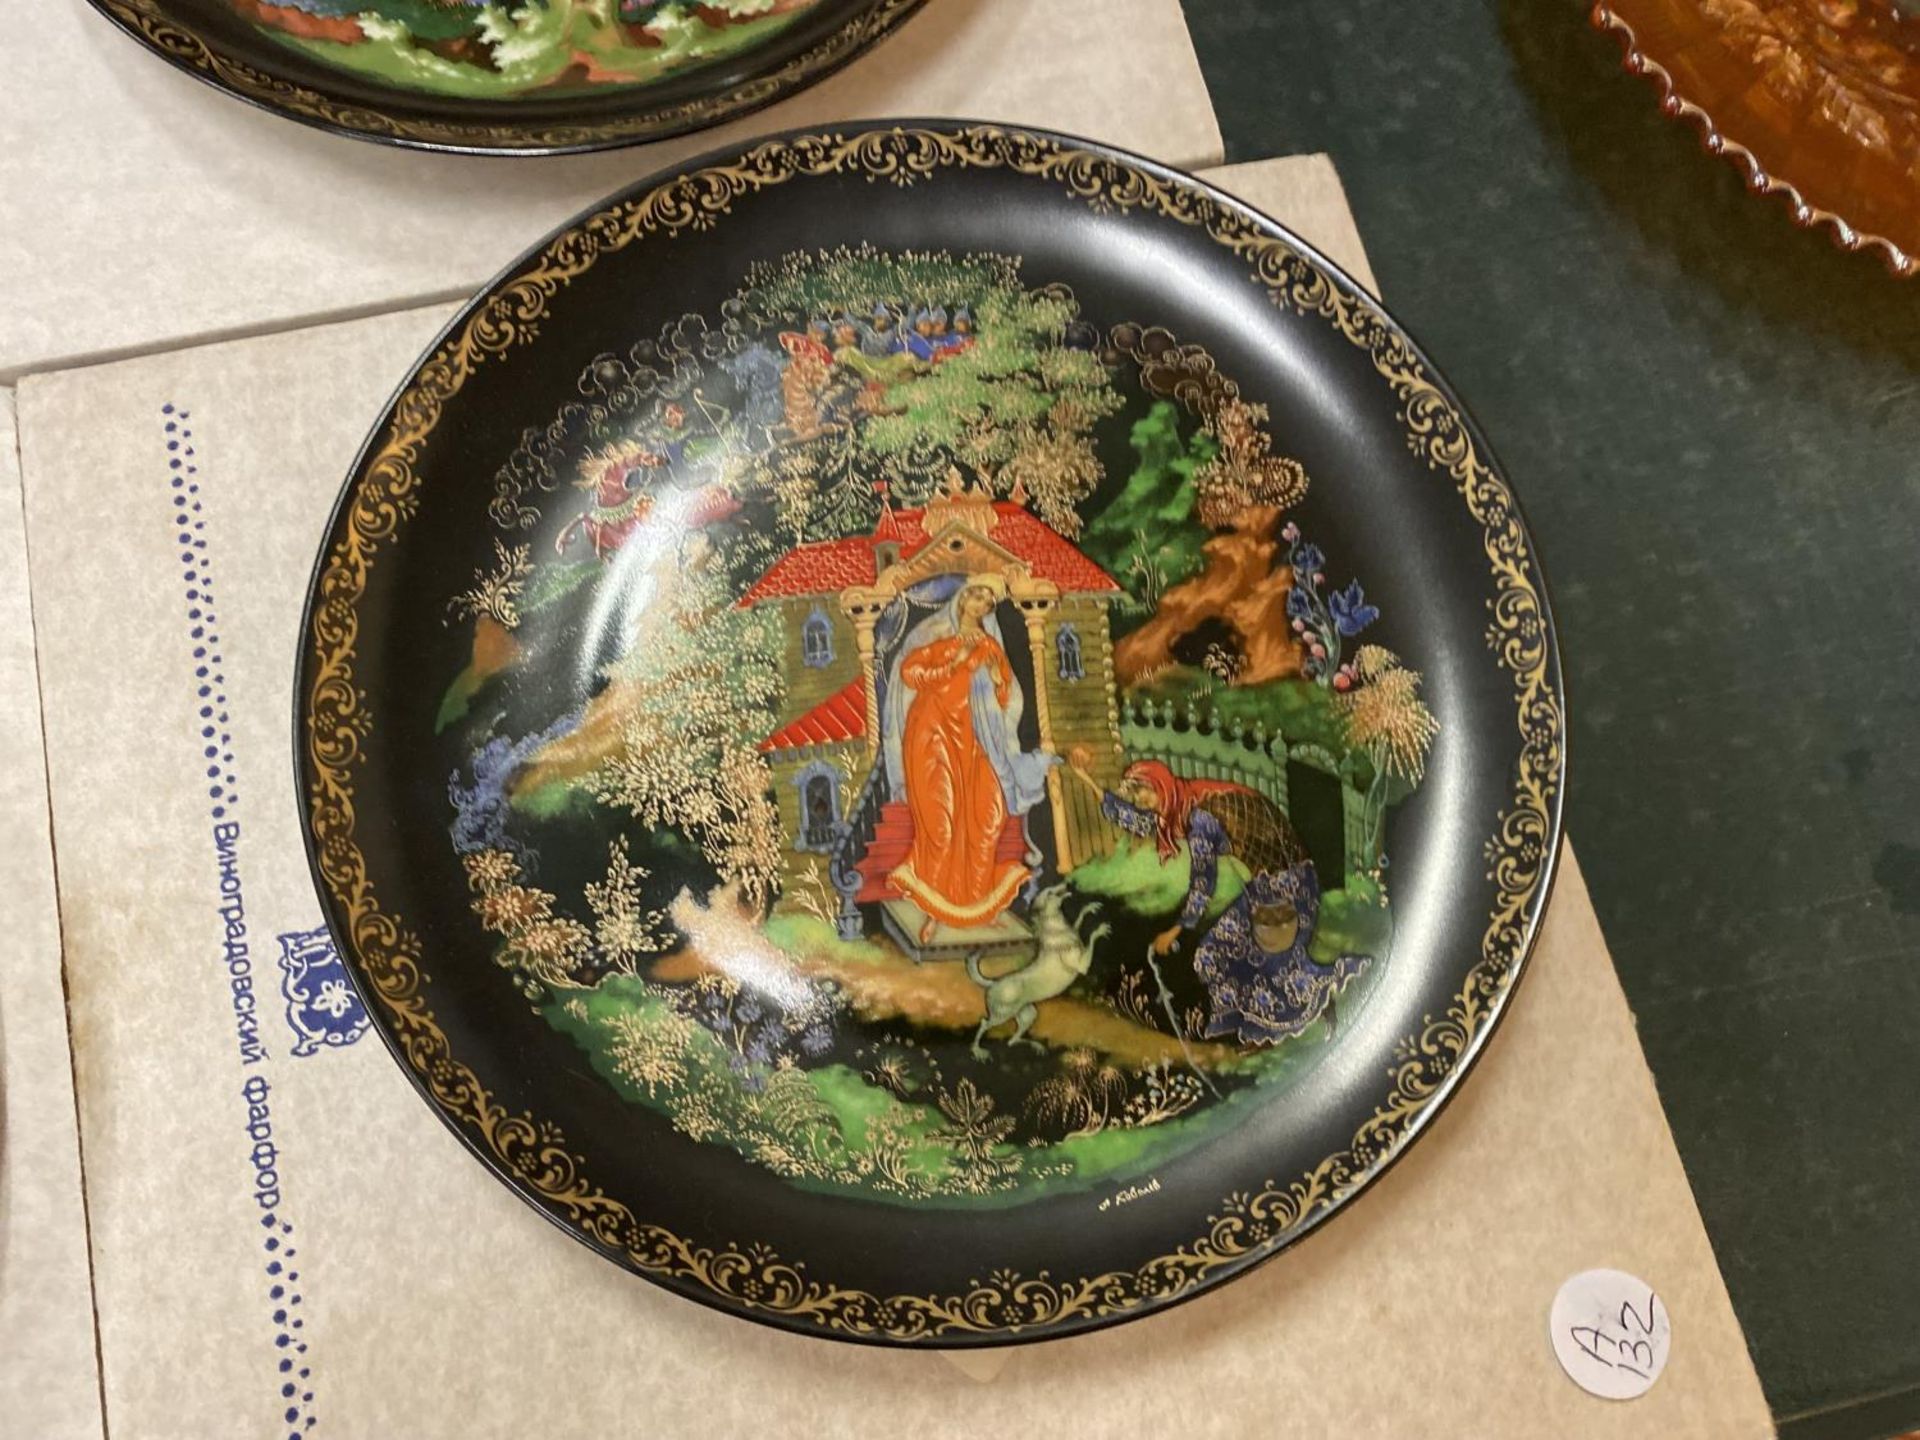 SIX BRADFORD EXCHANGE COLLECTABLE CABINET PLATES WITH RUSSIAN FAIRYTALE SCENES - Image 3 of 6